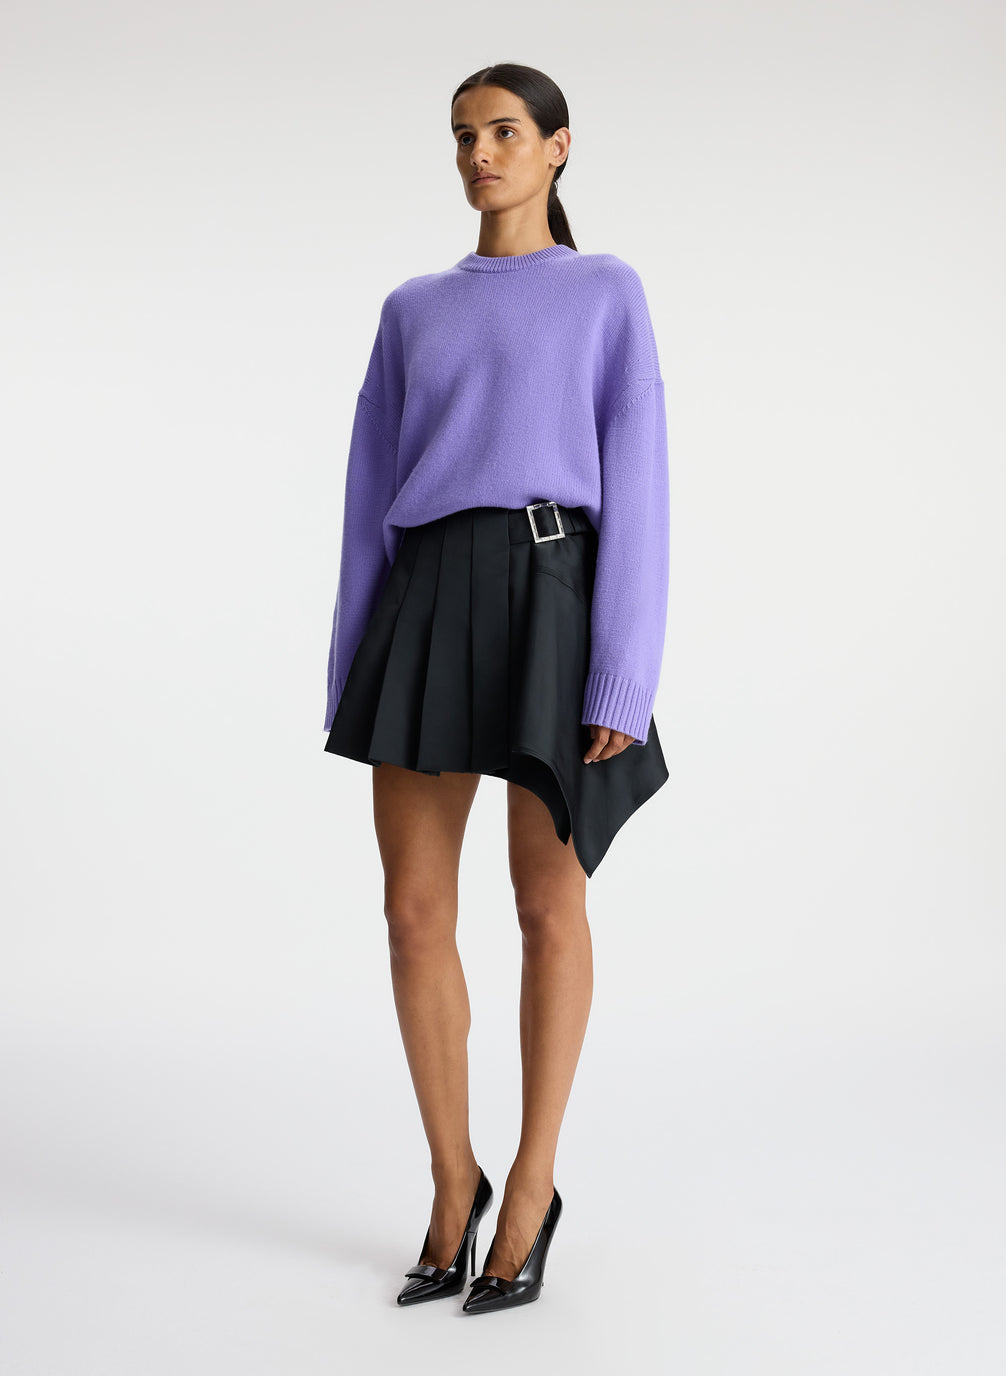 side view of woman wearing purple sweater and black pleated mini skirt